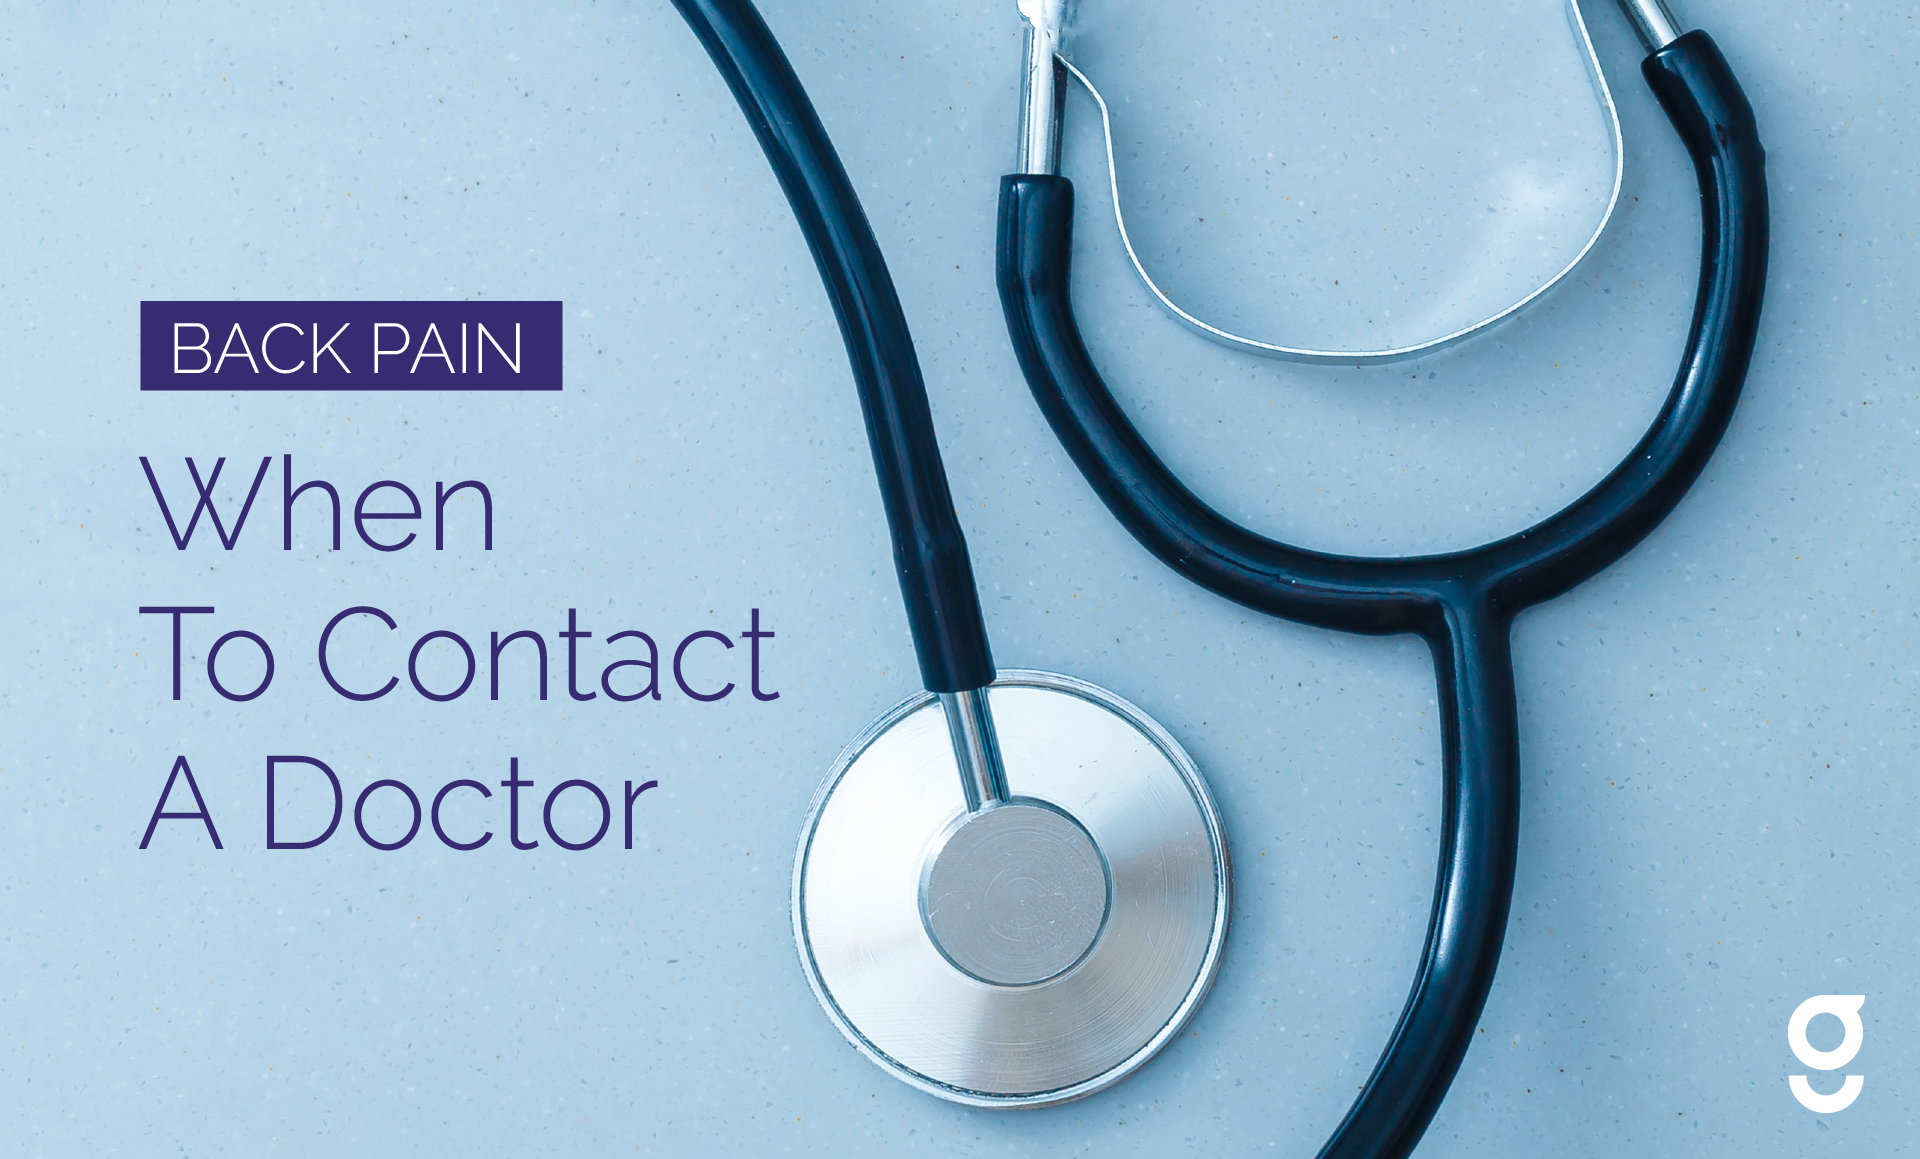 Back Pain: When To Contact Your Doctor